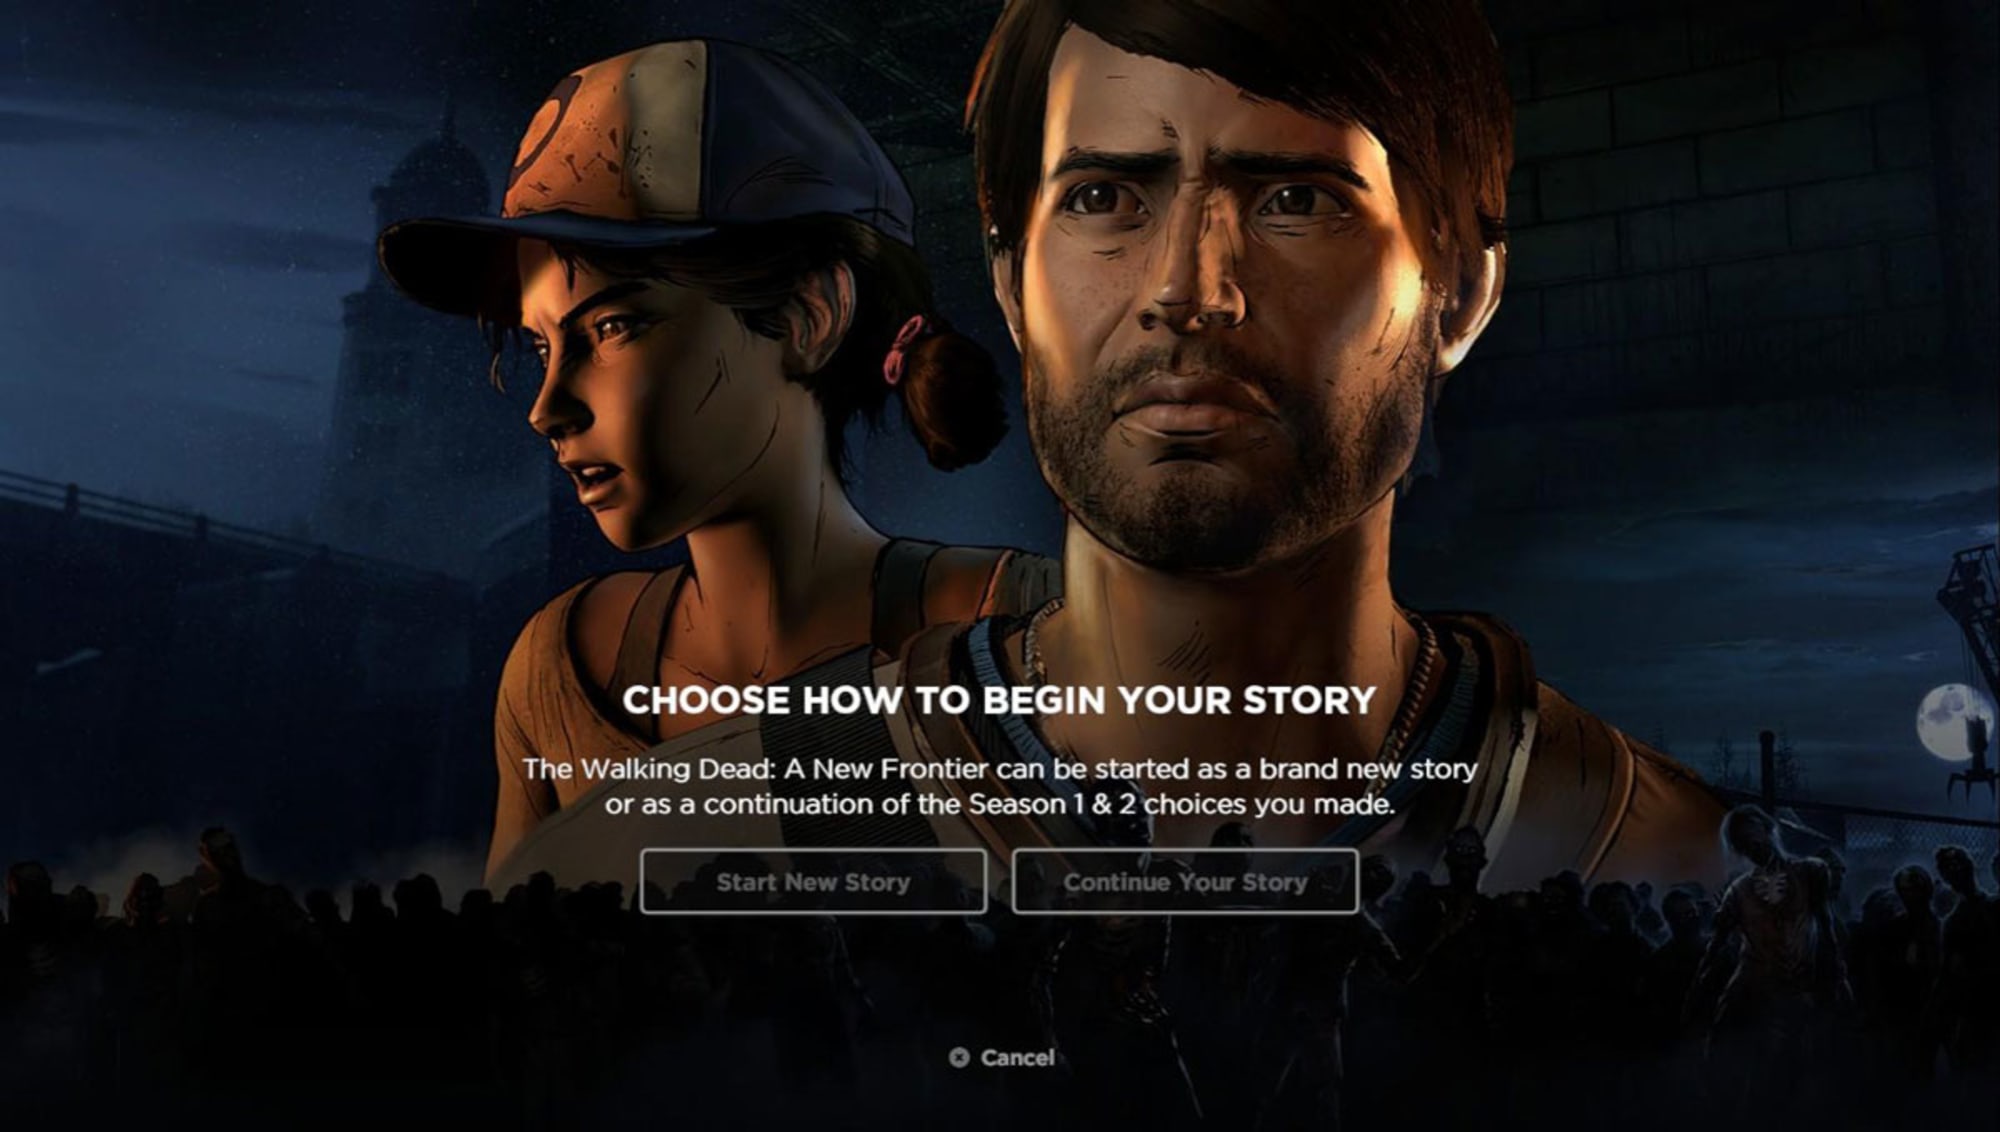 That new story. The Walking Dead: a New Frontier. The Walking Dead a New Frontier меню игры. The Walking Dead: a New Frontier Telltale. New Frontier игра.